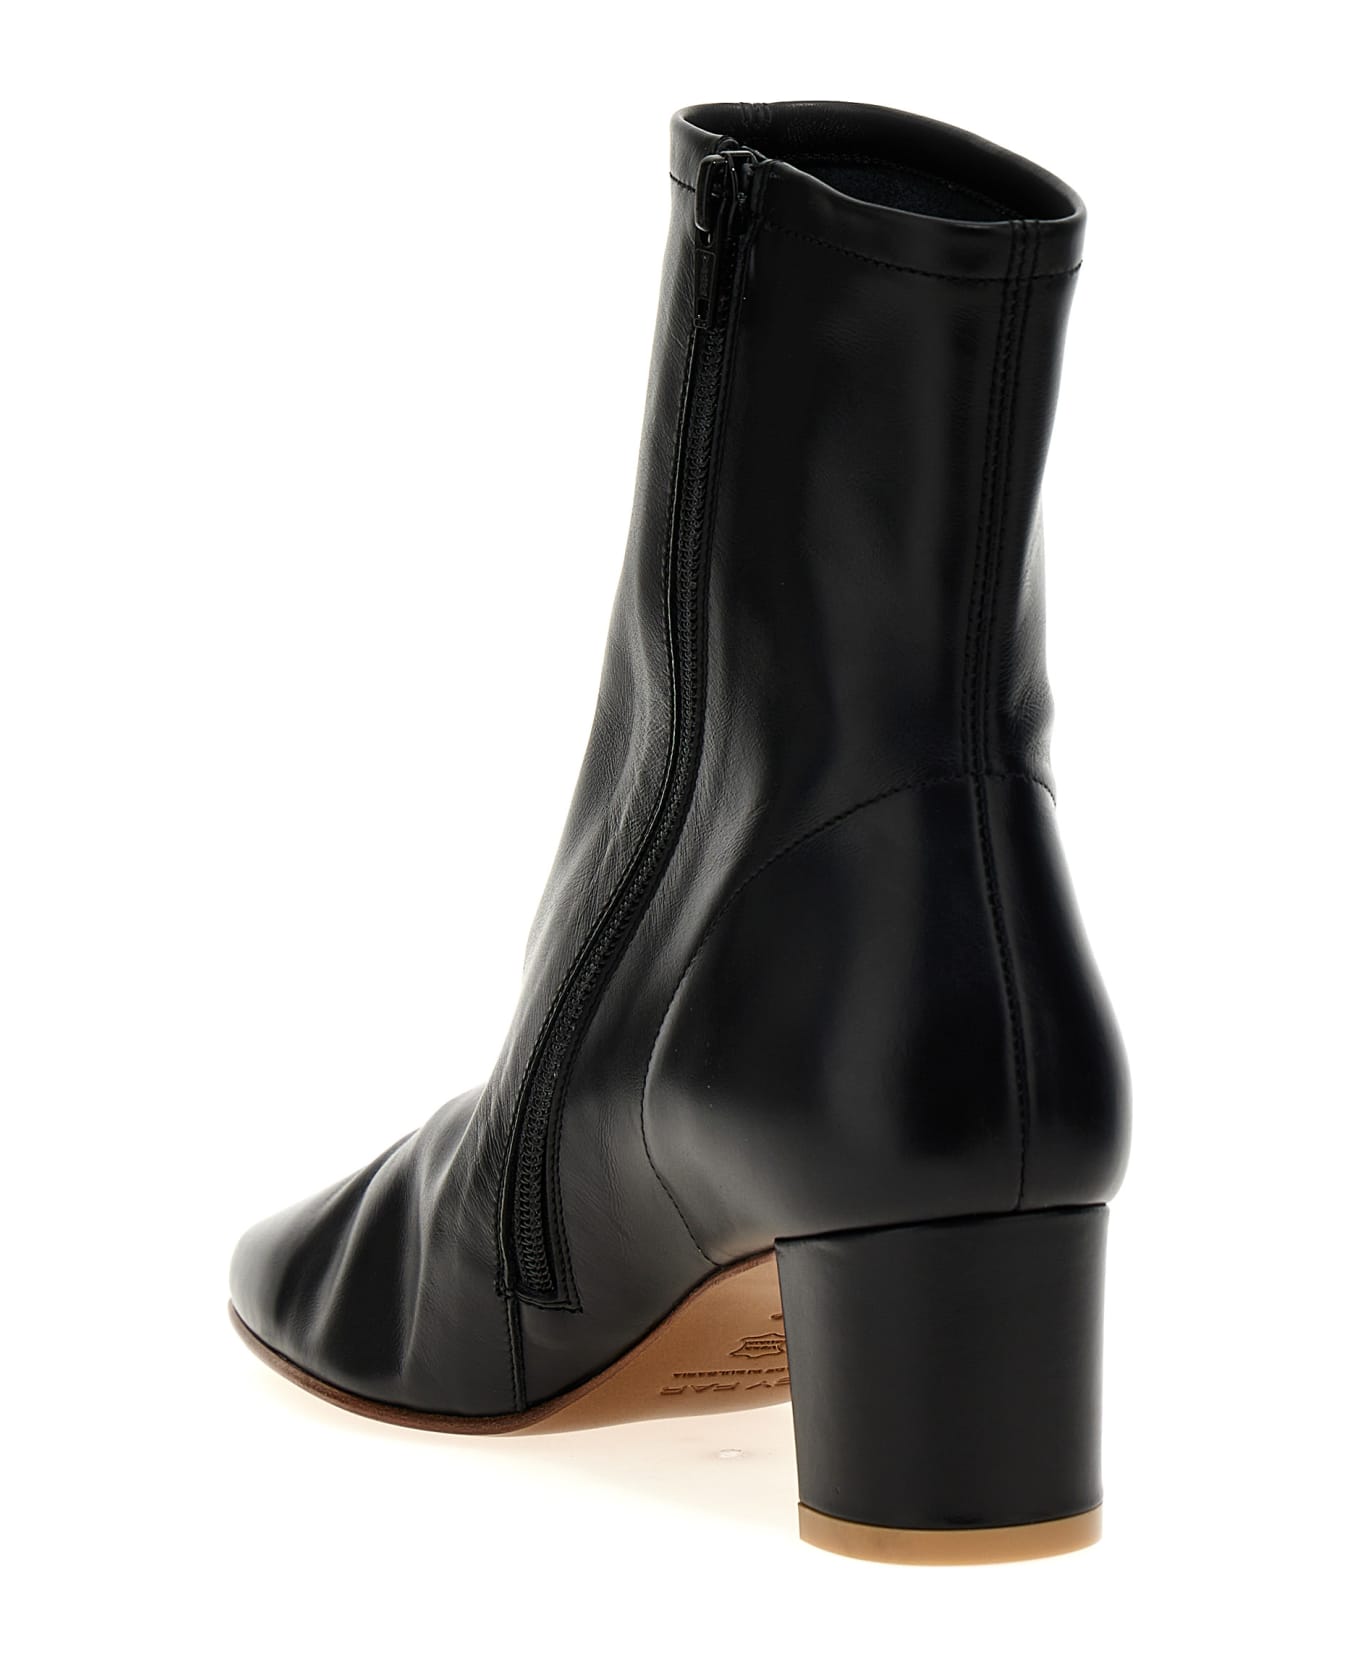 BY FAR 'sofia' Ankle Boots - Black  